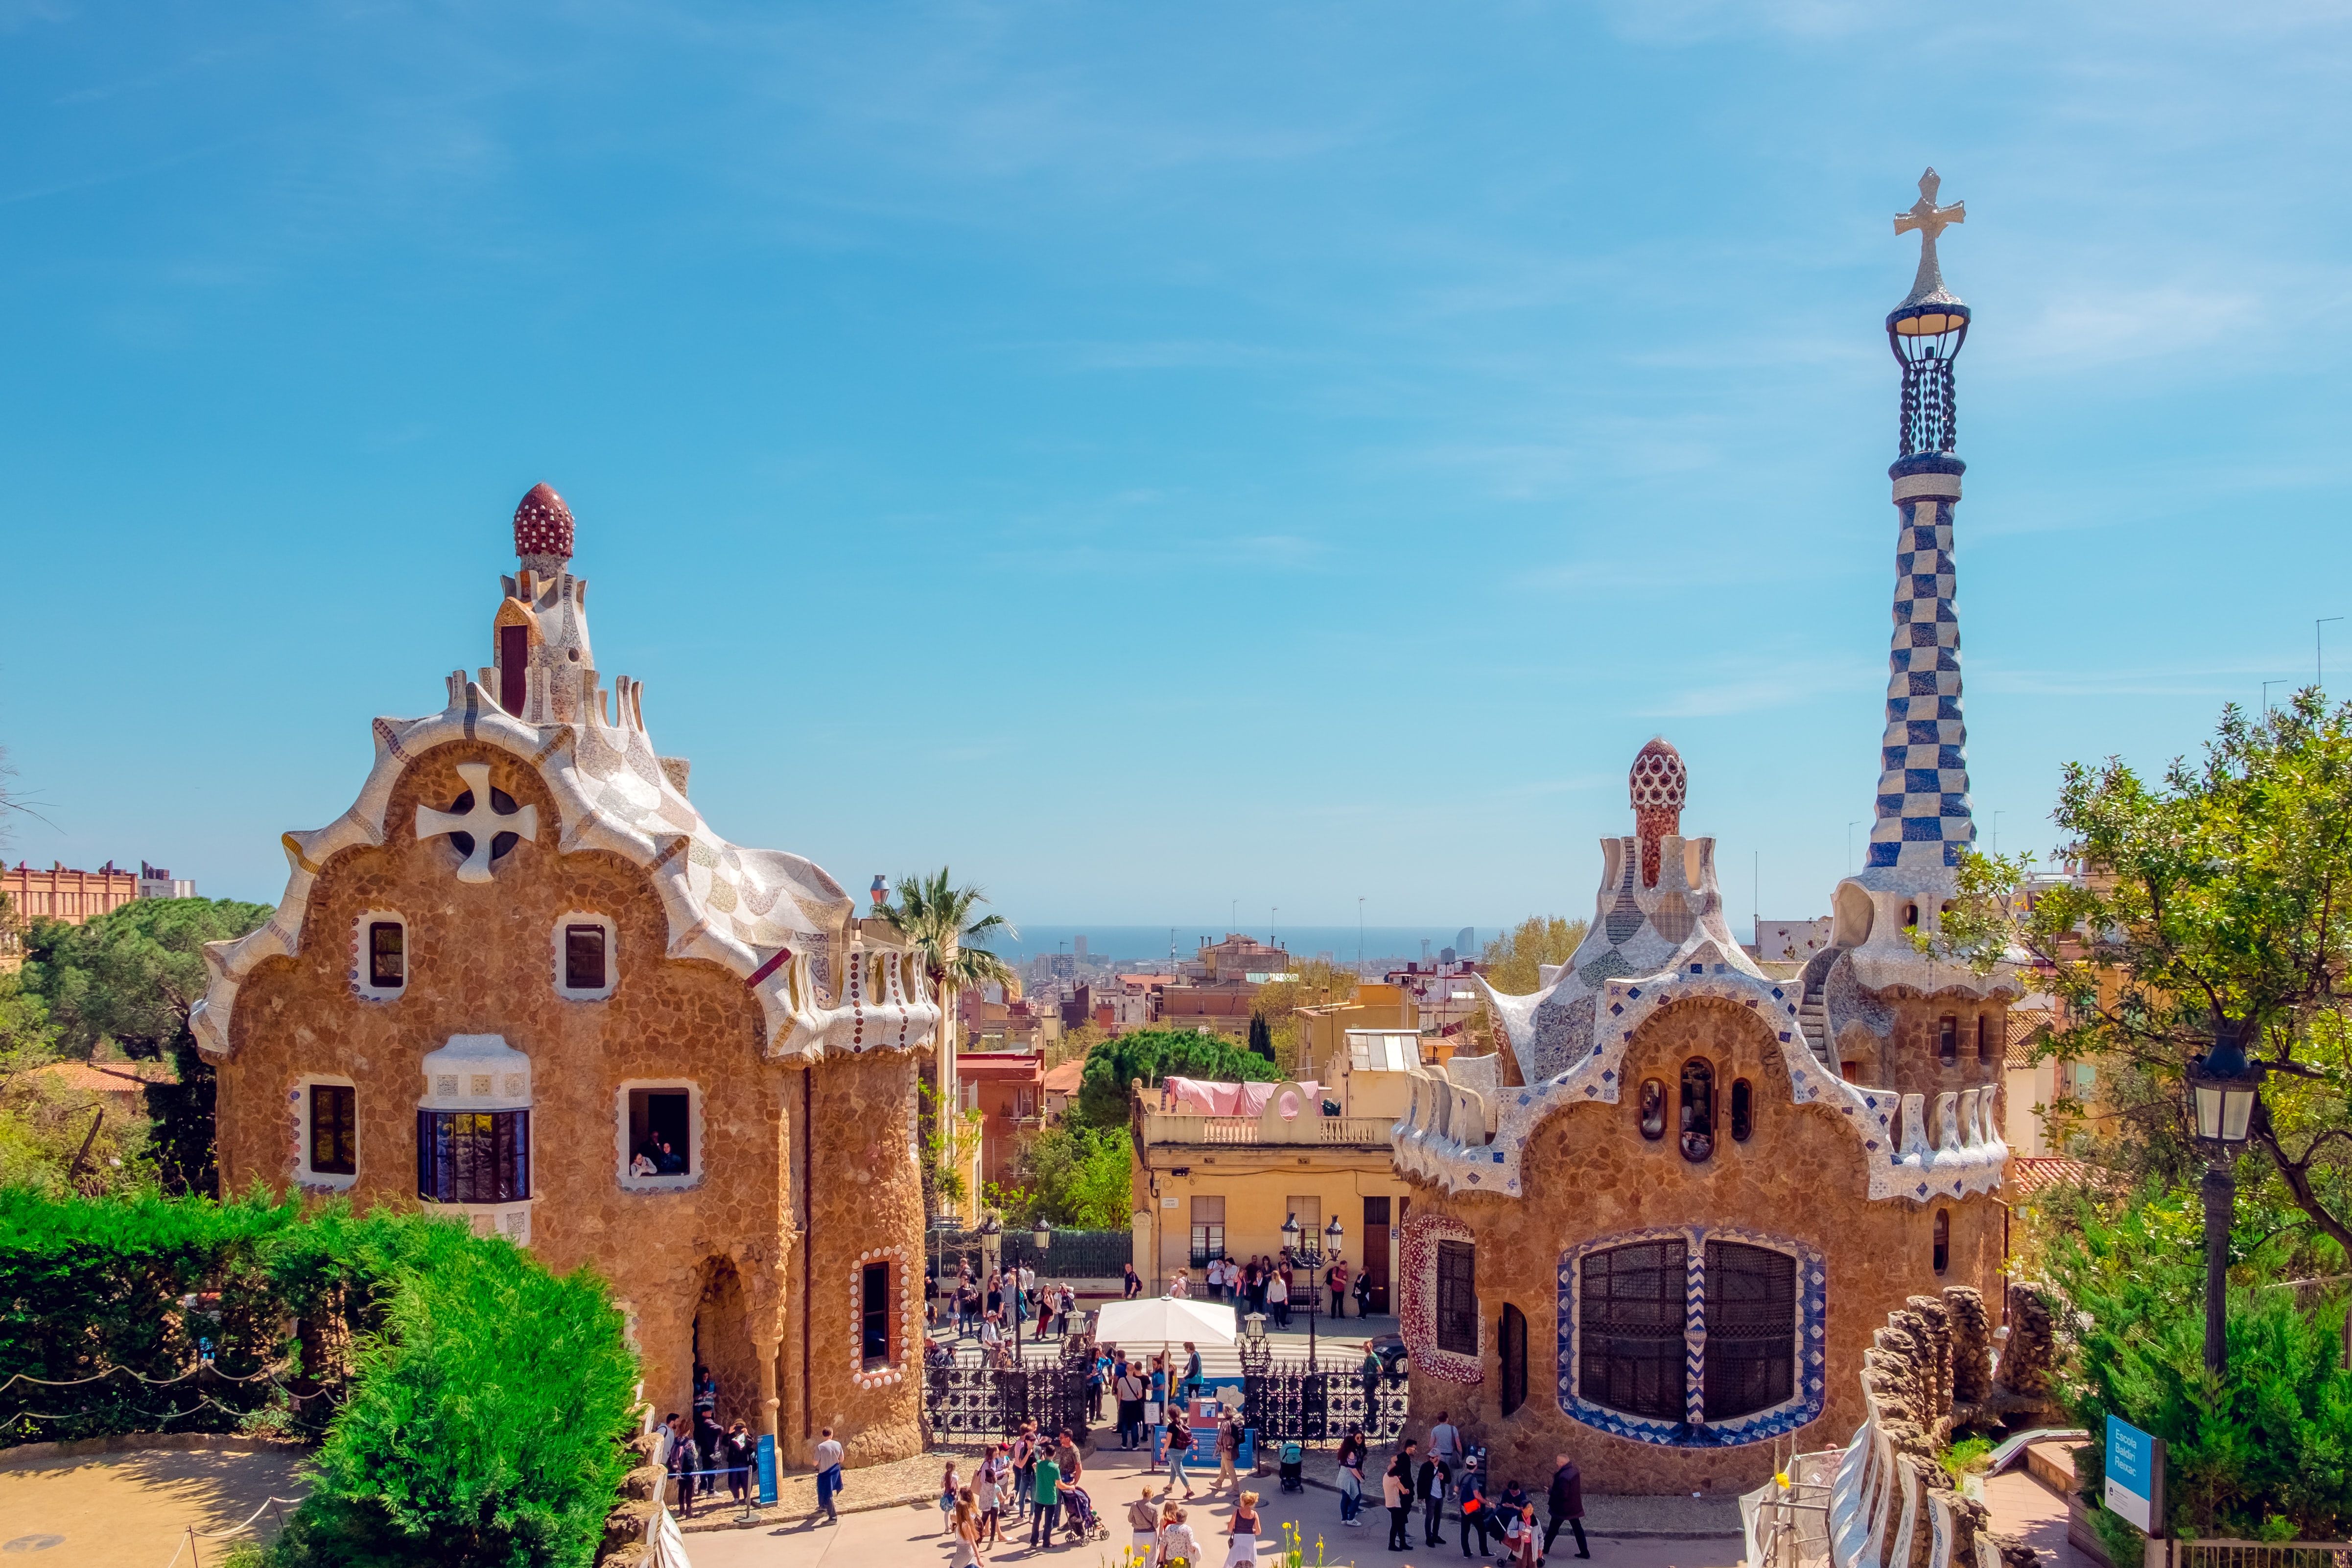 Colorful architecture under blue skies in Barcelona